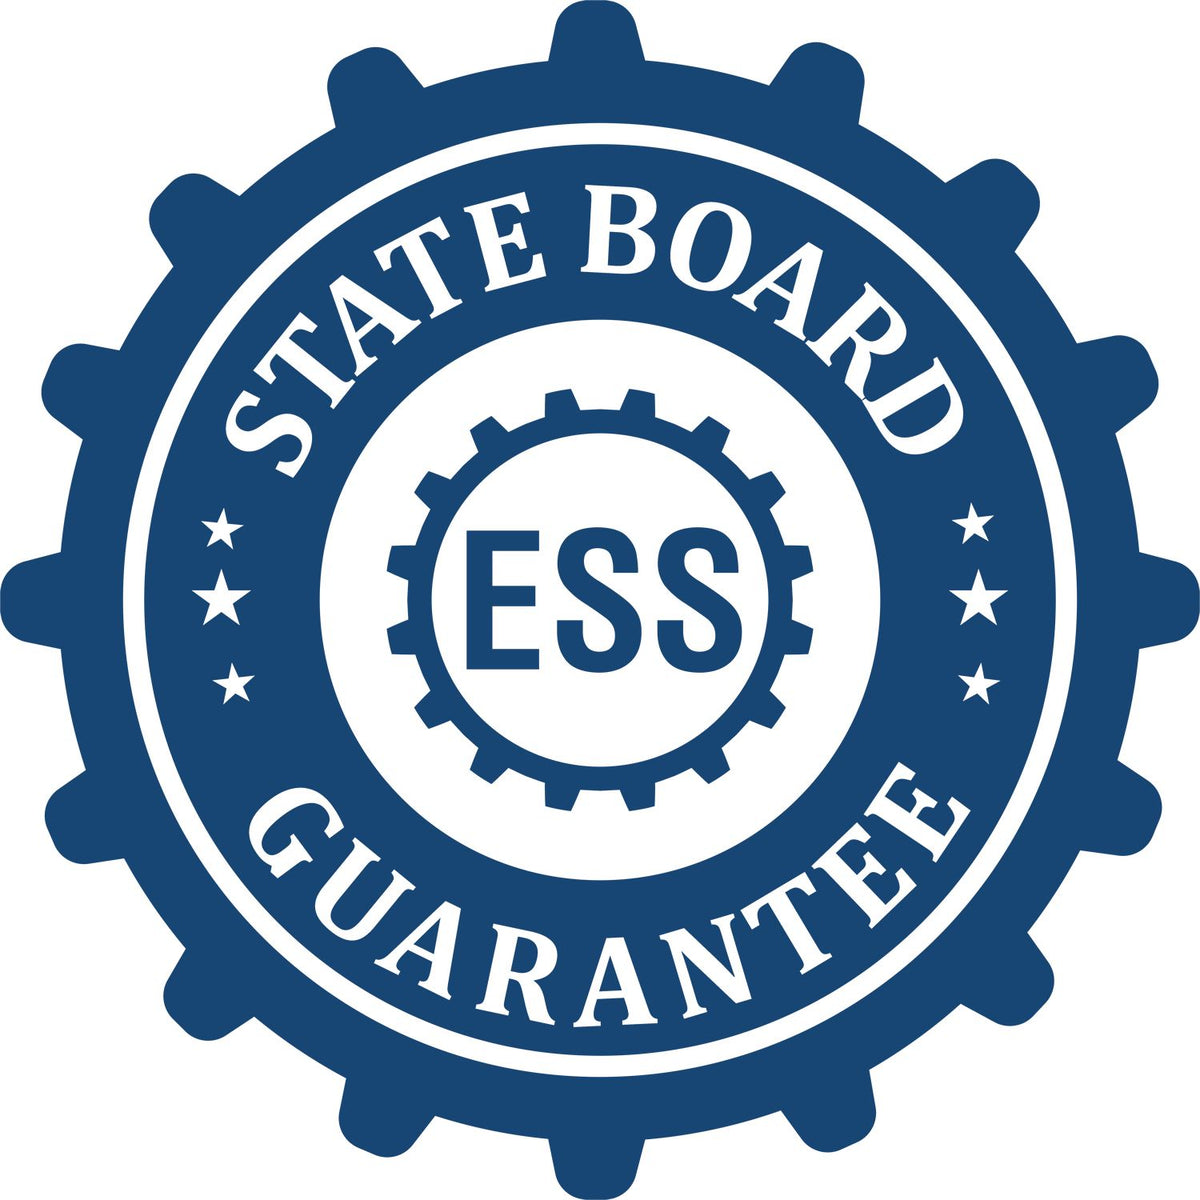 An emblem in a gear shape illustrating a state board guarantee for the Hybrid Texas Landscape Architect Seal